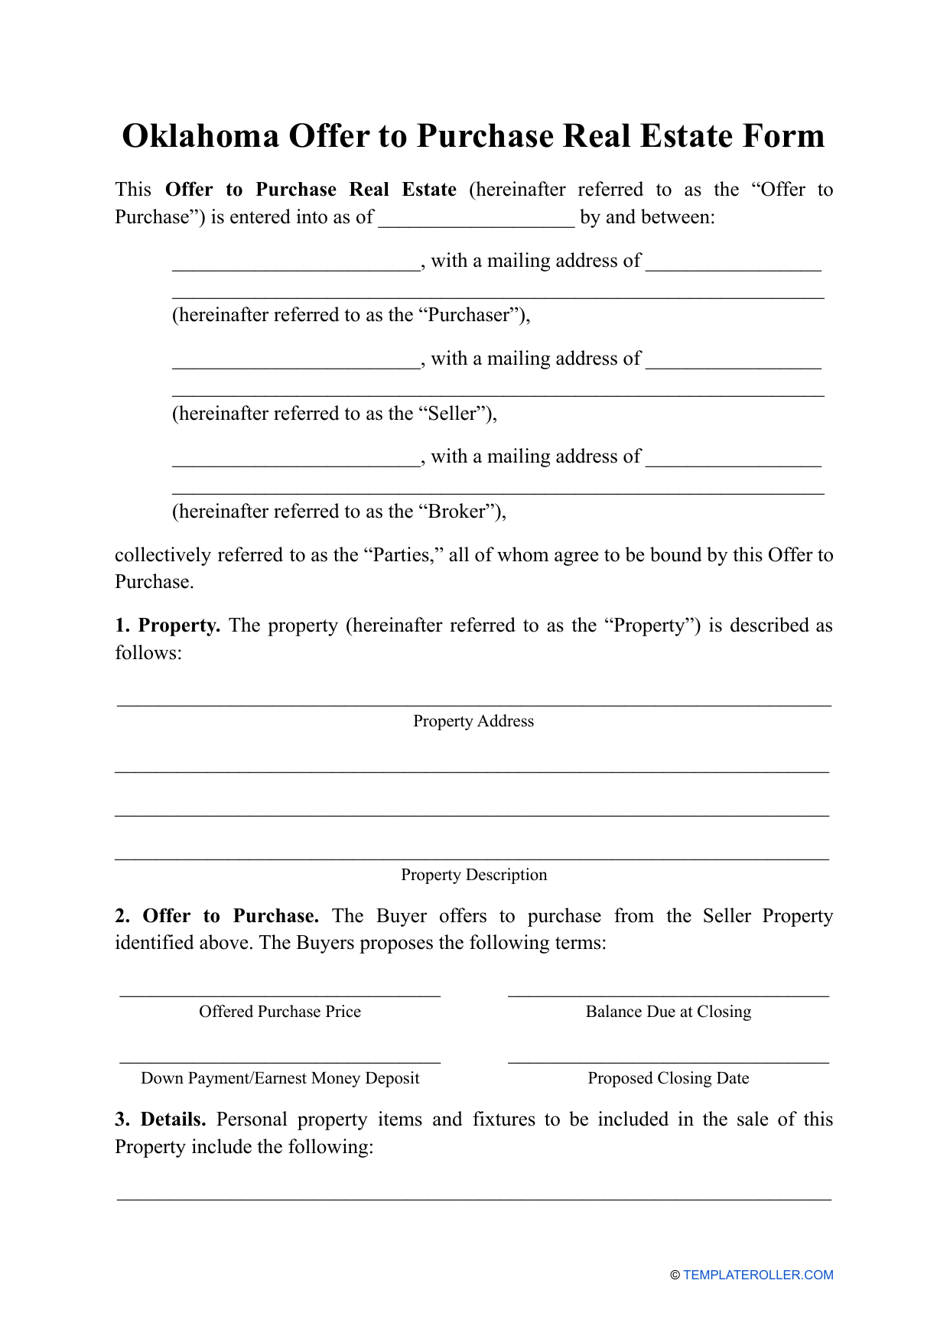 oklahoma-offer-to-purchase-real-estate-form-download-printable-pdf